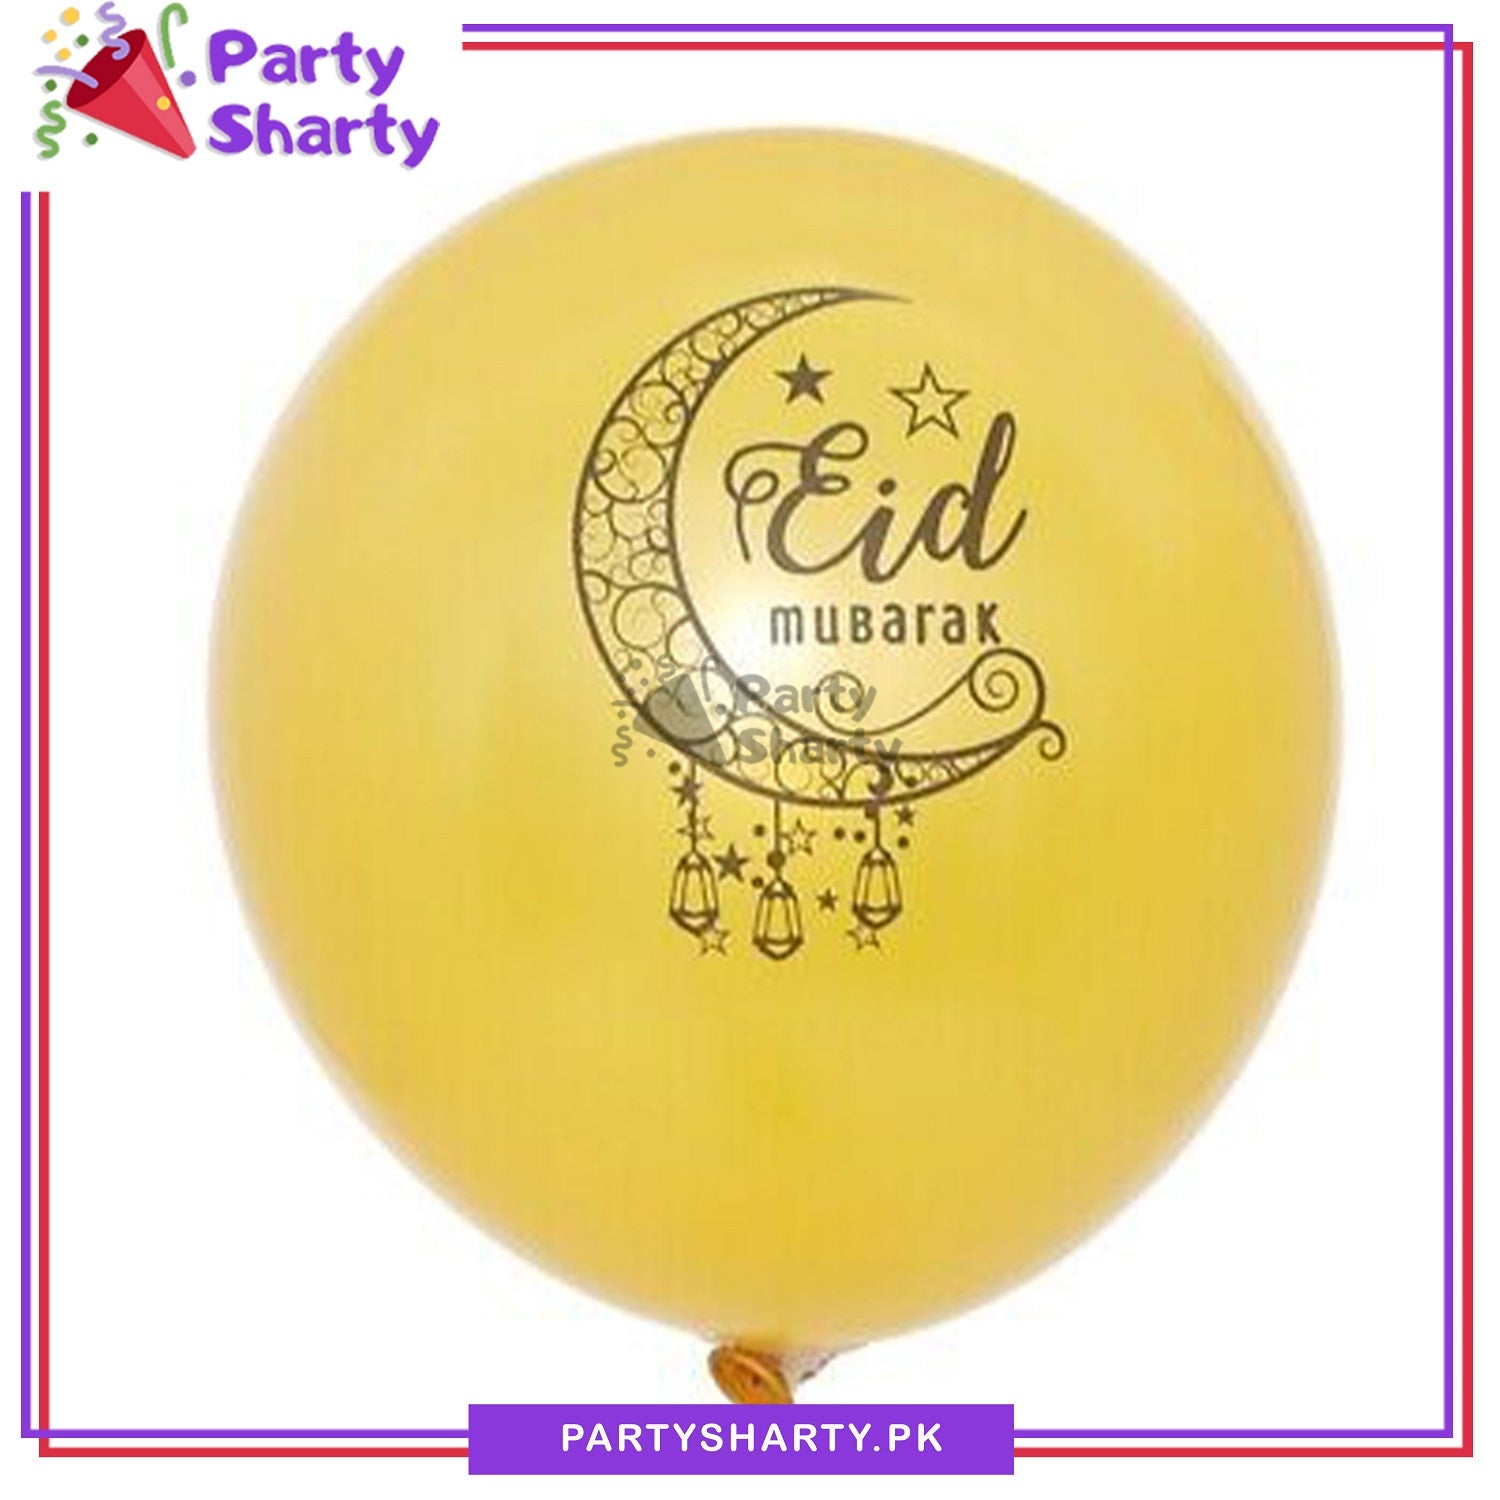 Eid Mubarak Printed Latex Balloons For Eid Milan Party Decoration and Celebration